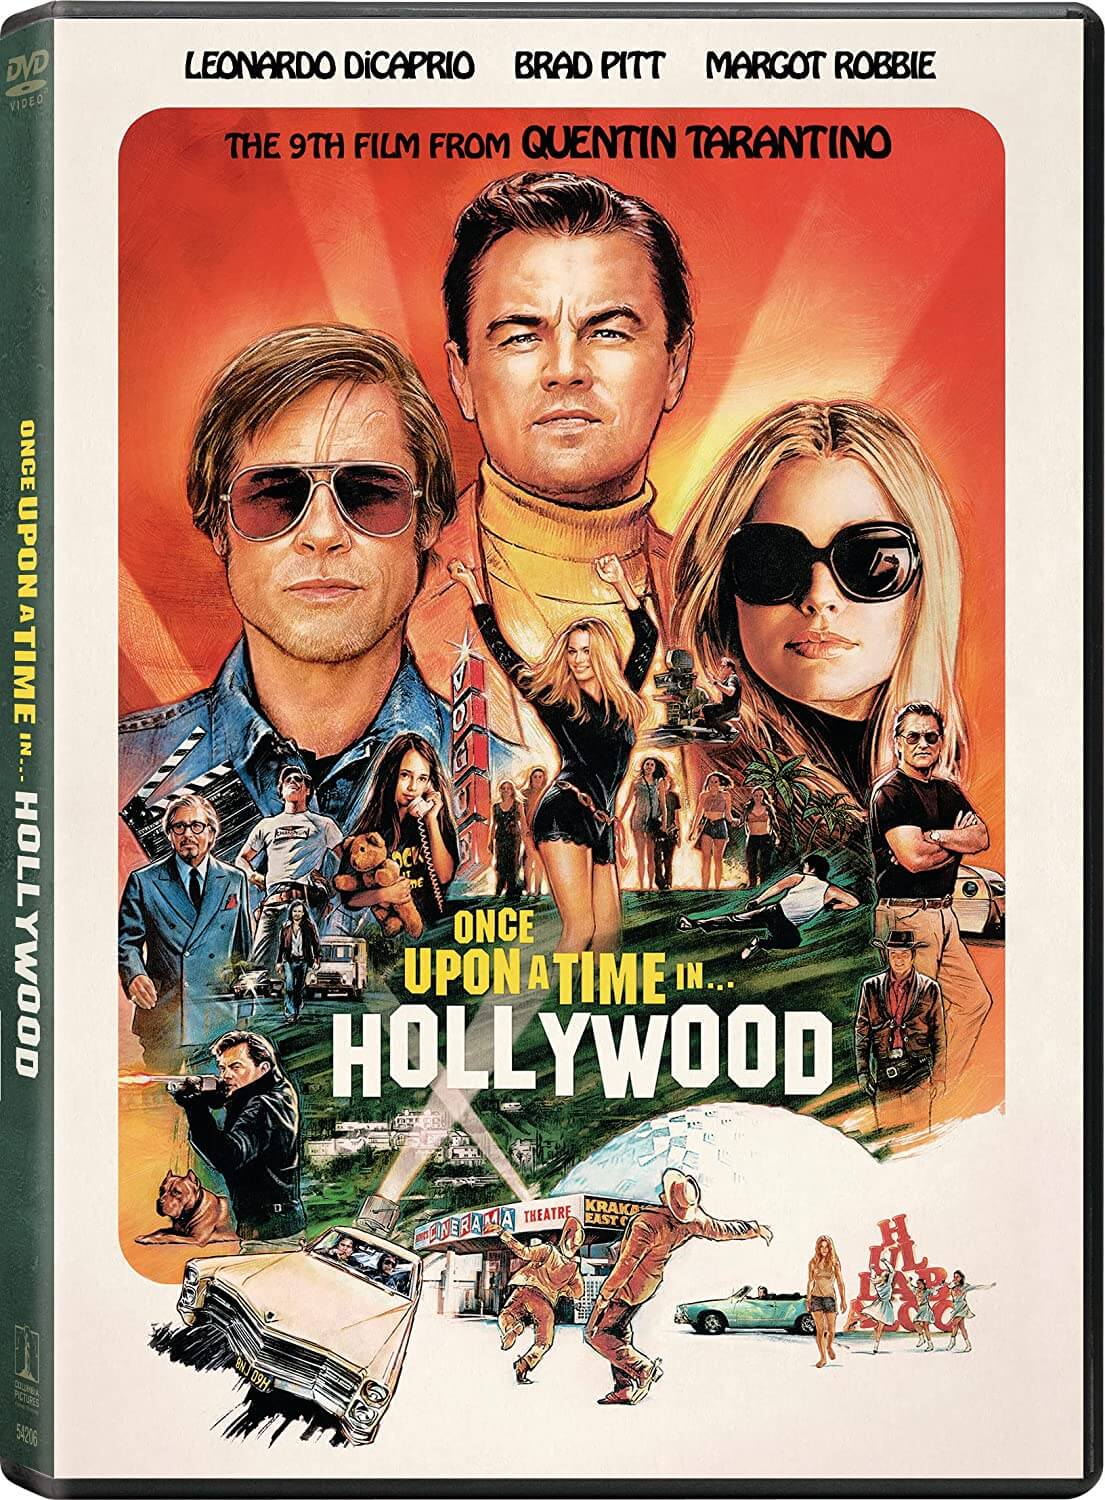 "Once Upon a Time in Hollywood" (2019)